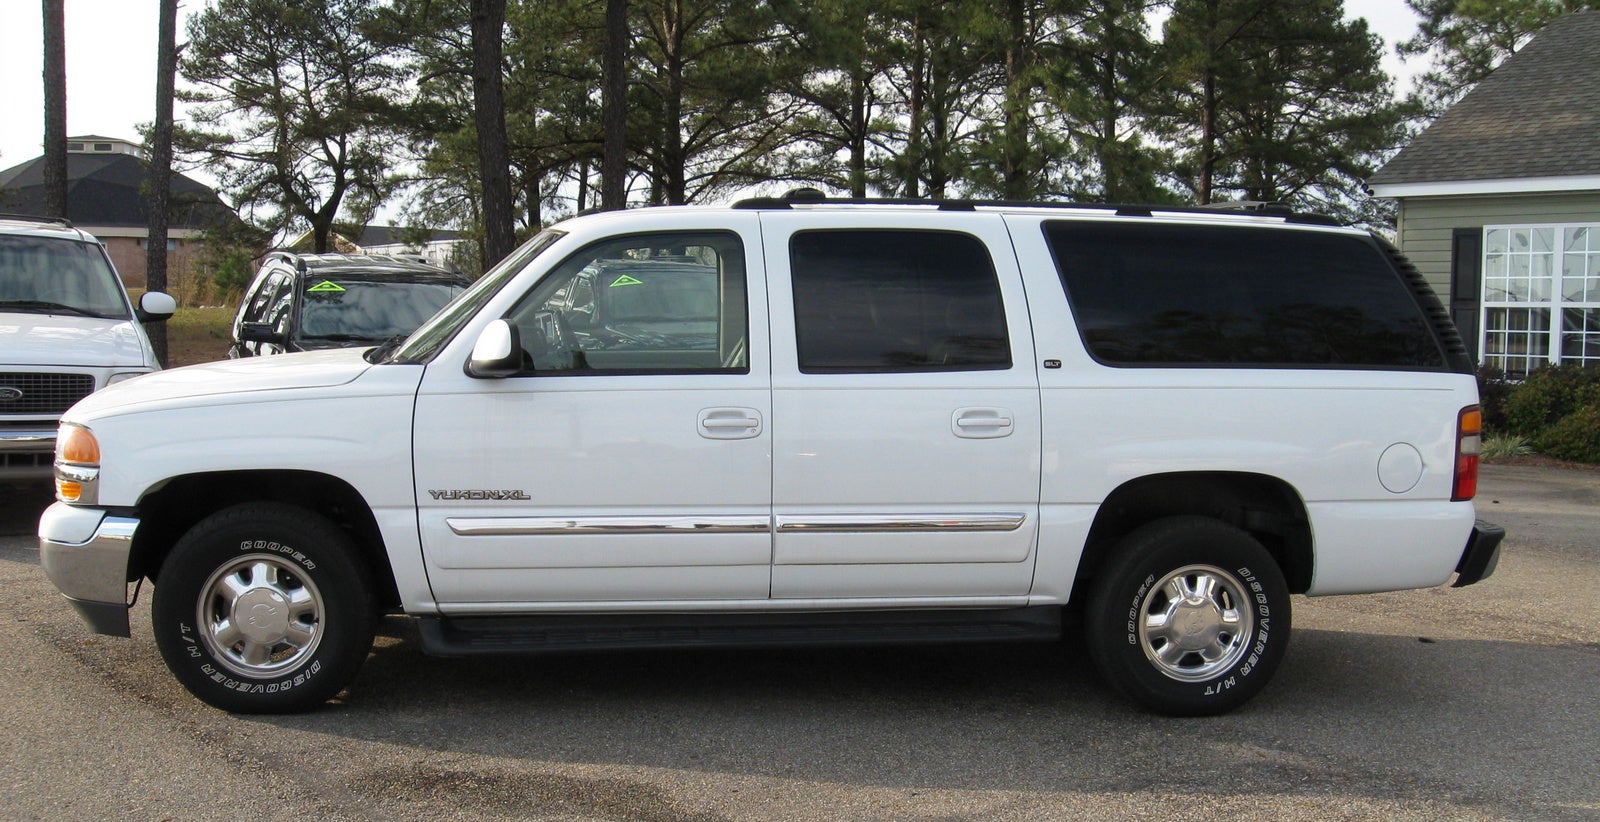 Gmc 2003 yukon towing specifications